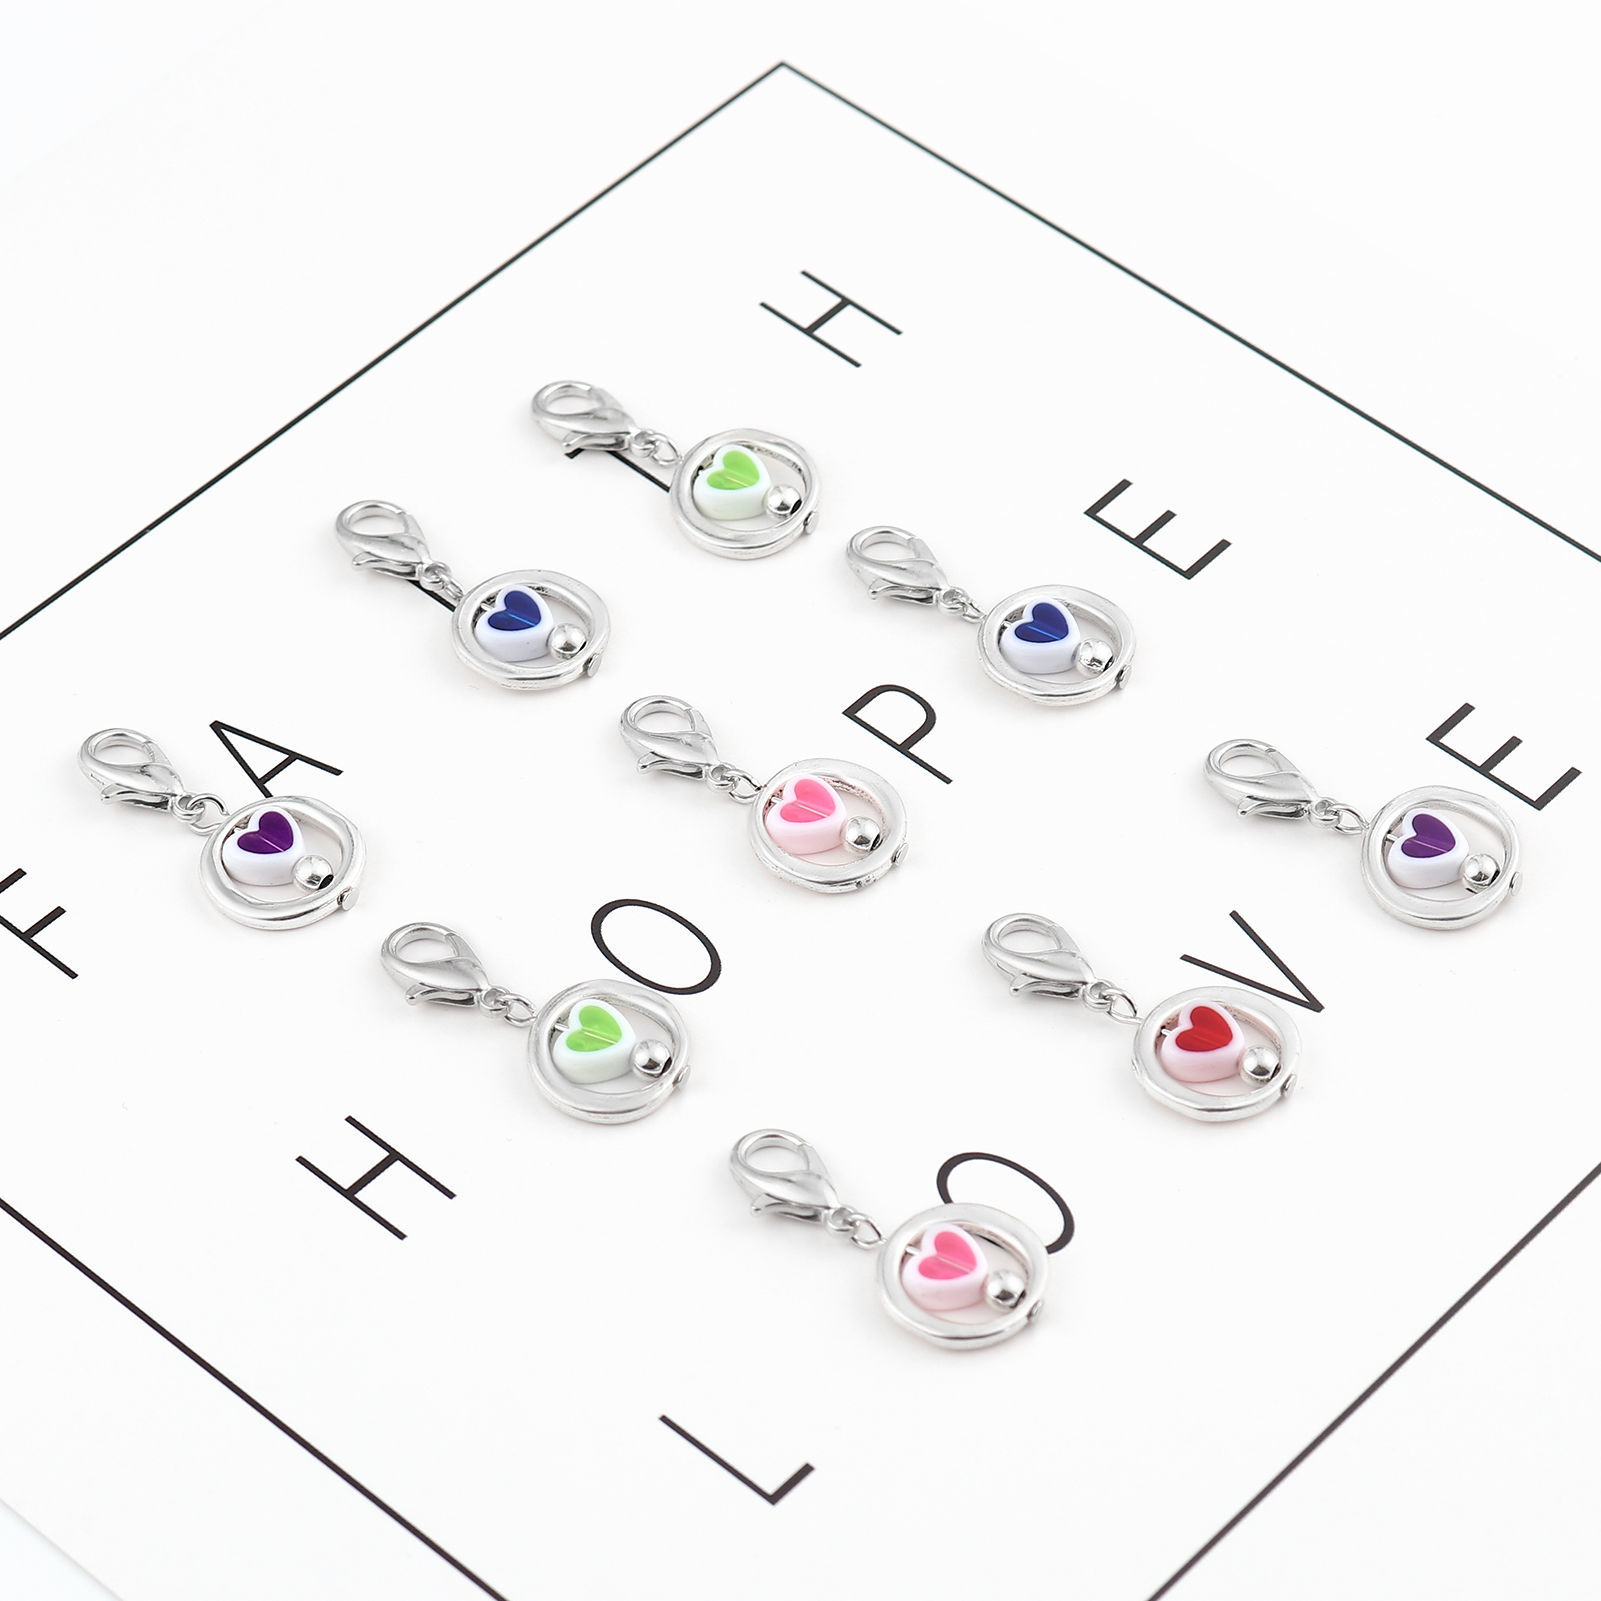 Picture of Zinc Based Alloy & Acrylic Knitting Stitch Markers Circle Ring Silver Tone At Random Color Heart 35mm x 16mm, 12 PCs